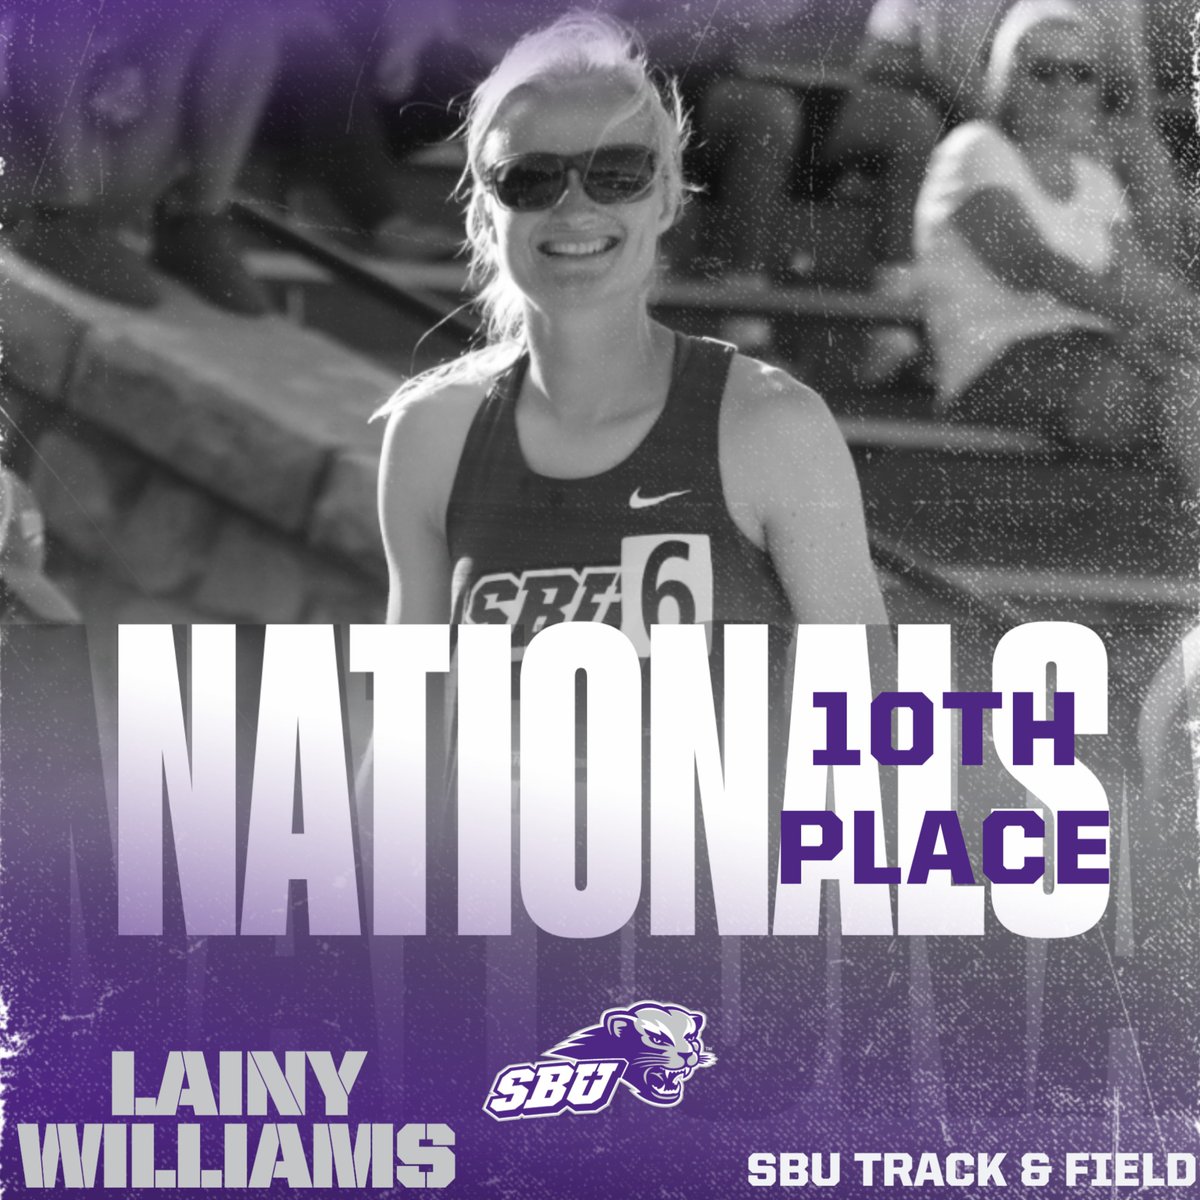 Lainy Williams finishes her amazing career with a 10th place finish in the 800-meter run!! This is her best finish at a National Championship! Way to go Lainy!! #RollCats @SBUniv